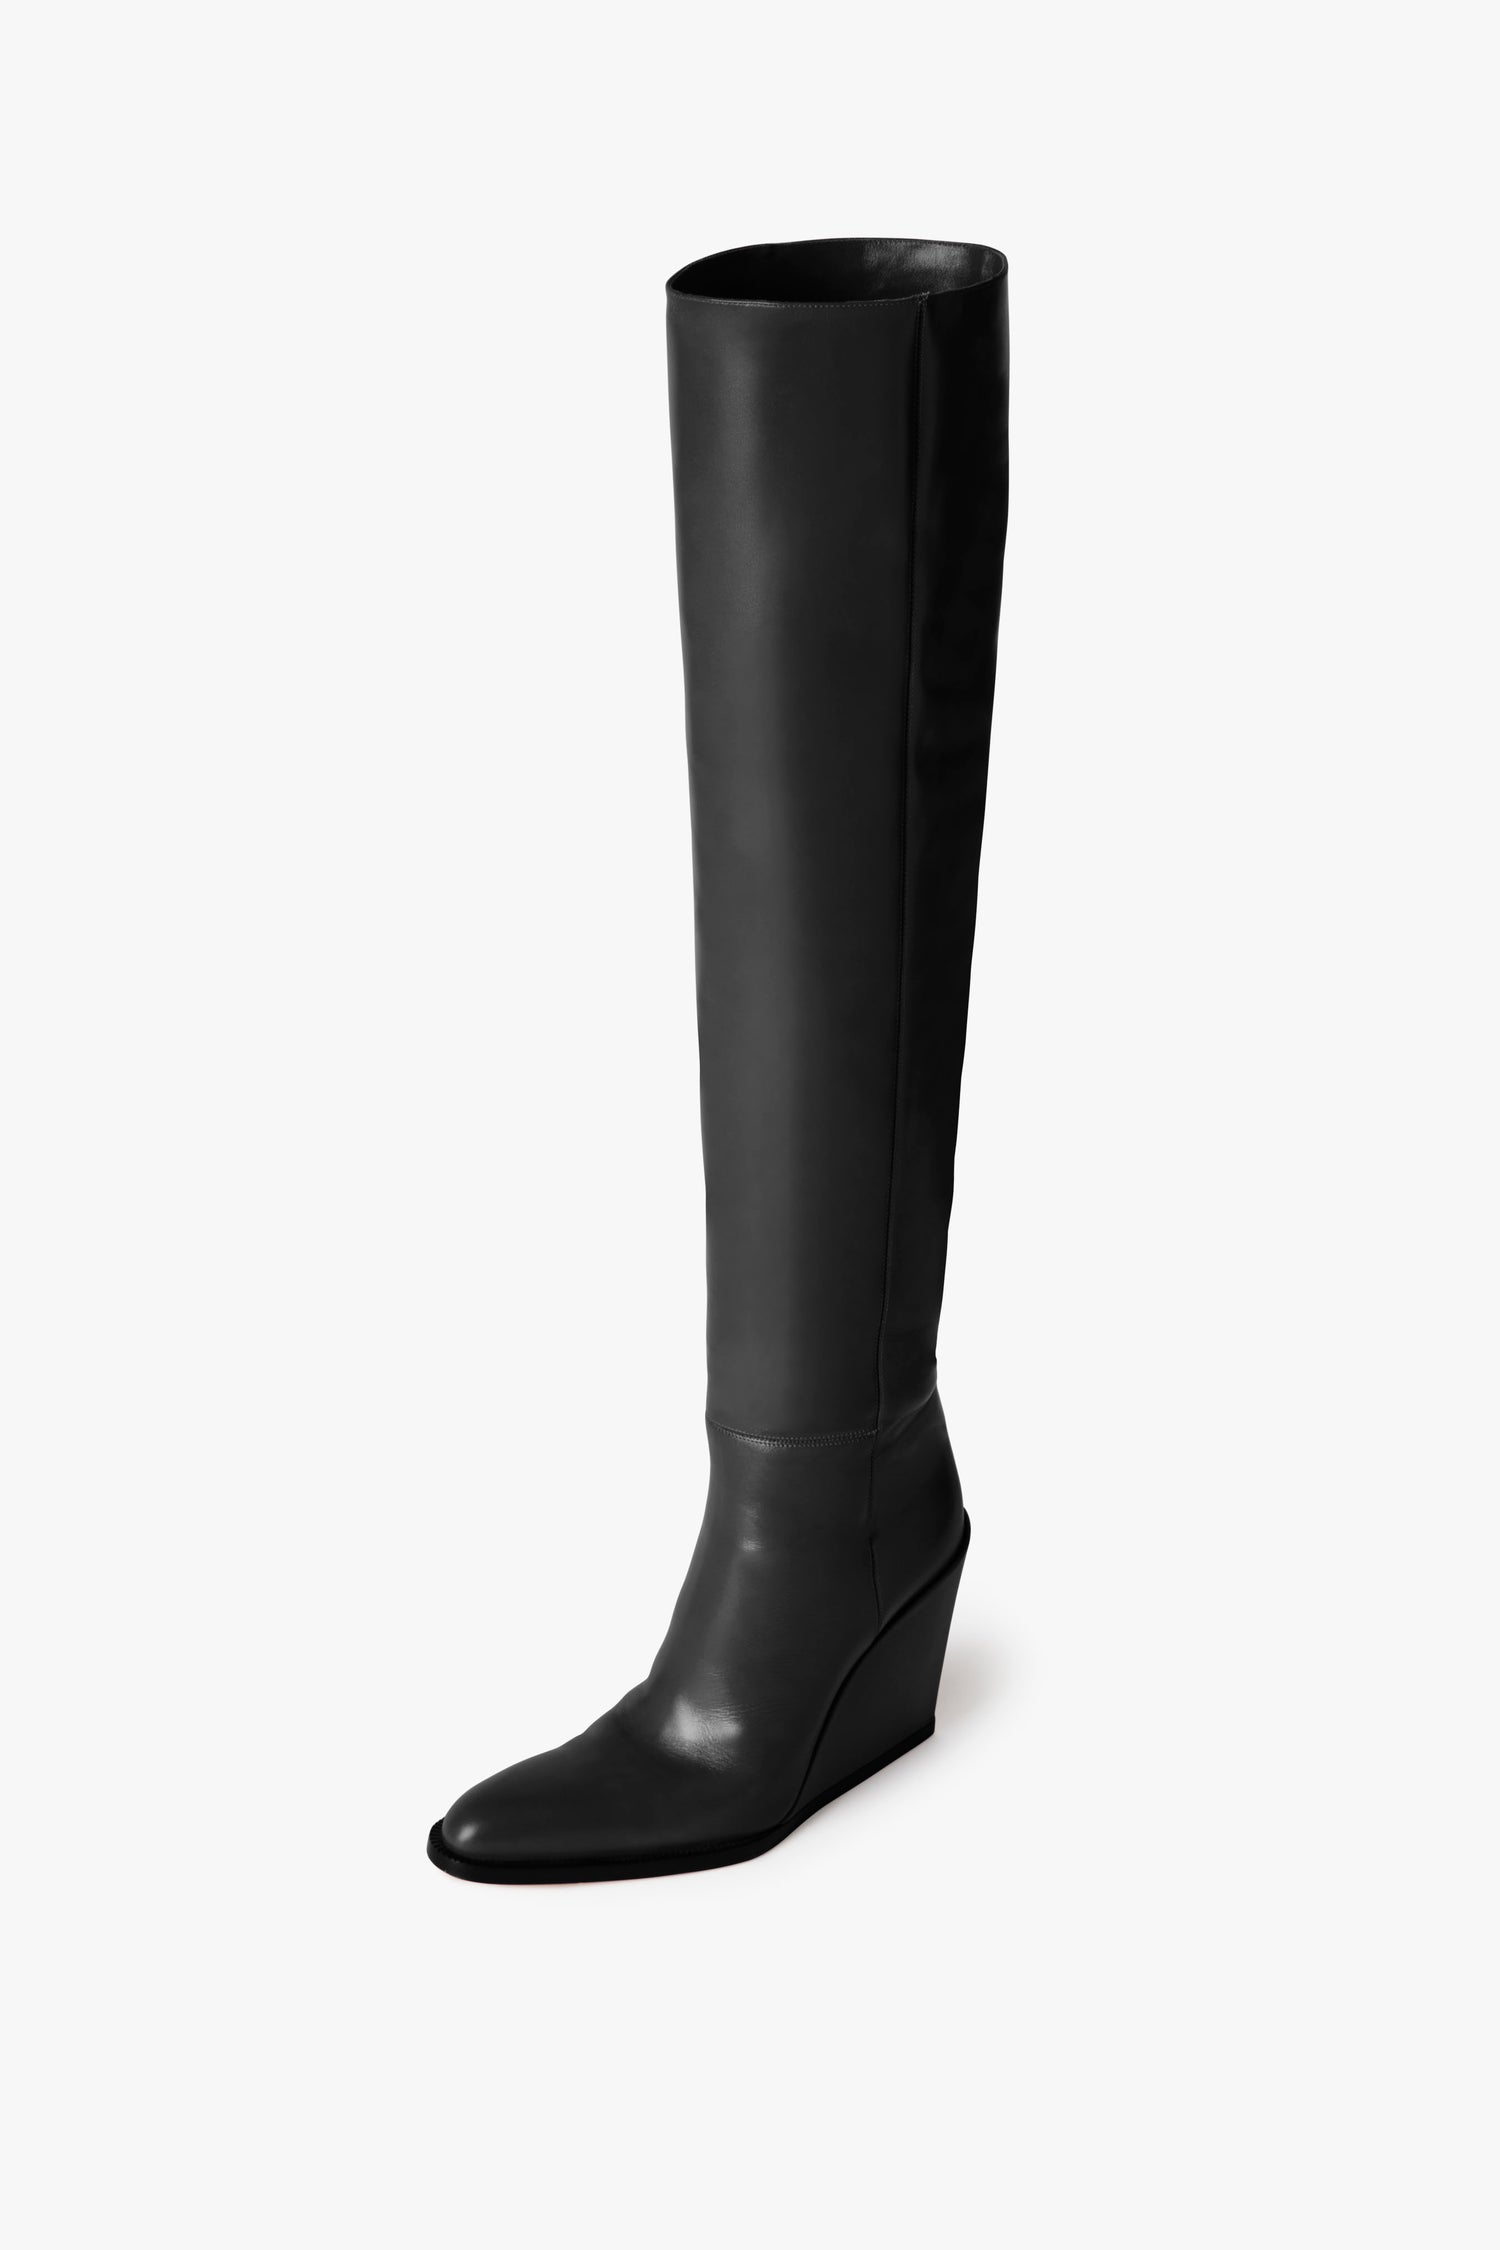 A single, tall Sky Boot In Black by Victoria Beckham with a pointed toe and sculptural heel stands elegantly on a plain white background.